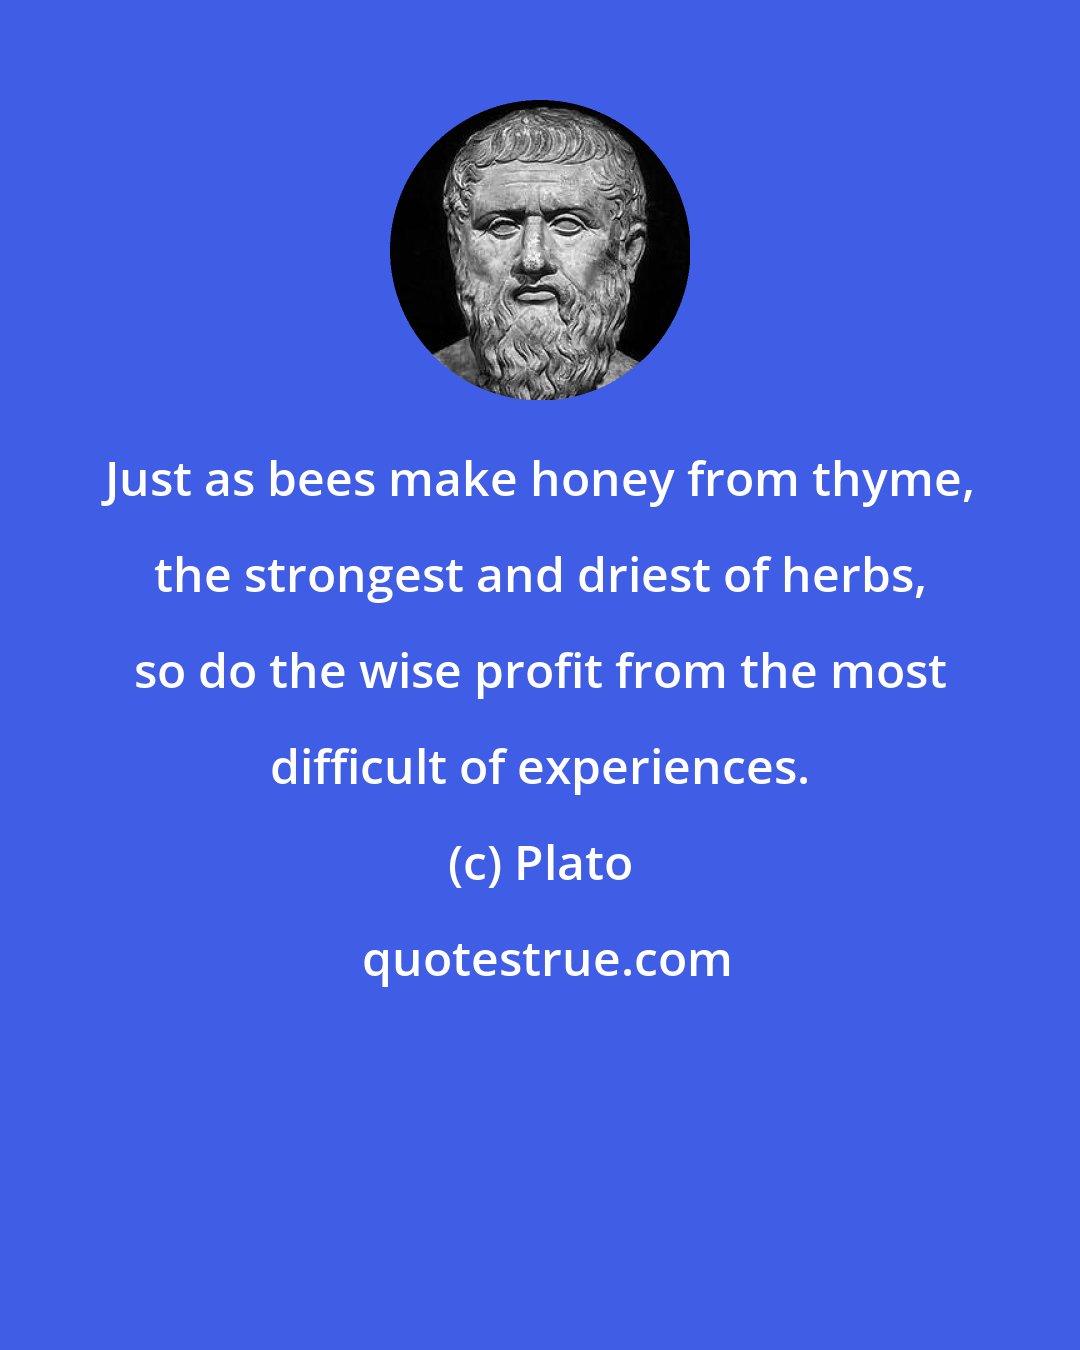 Plato: Just as bees make honey from thyme, the strongest and driest of herbs, so do the wise profit from the most difficult of experiences.